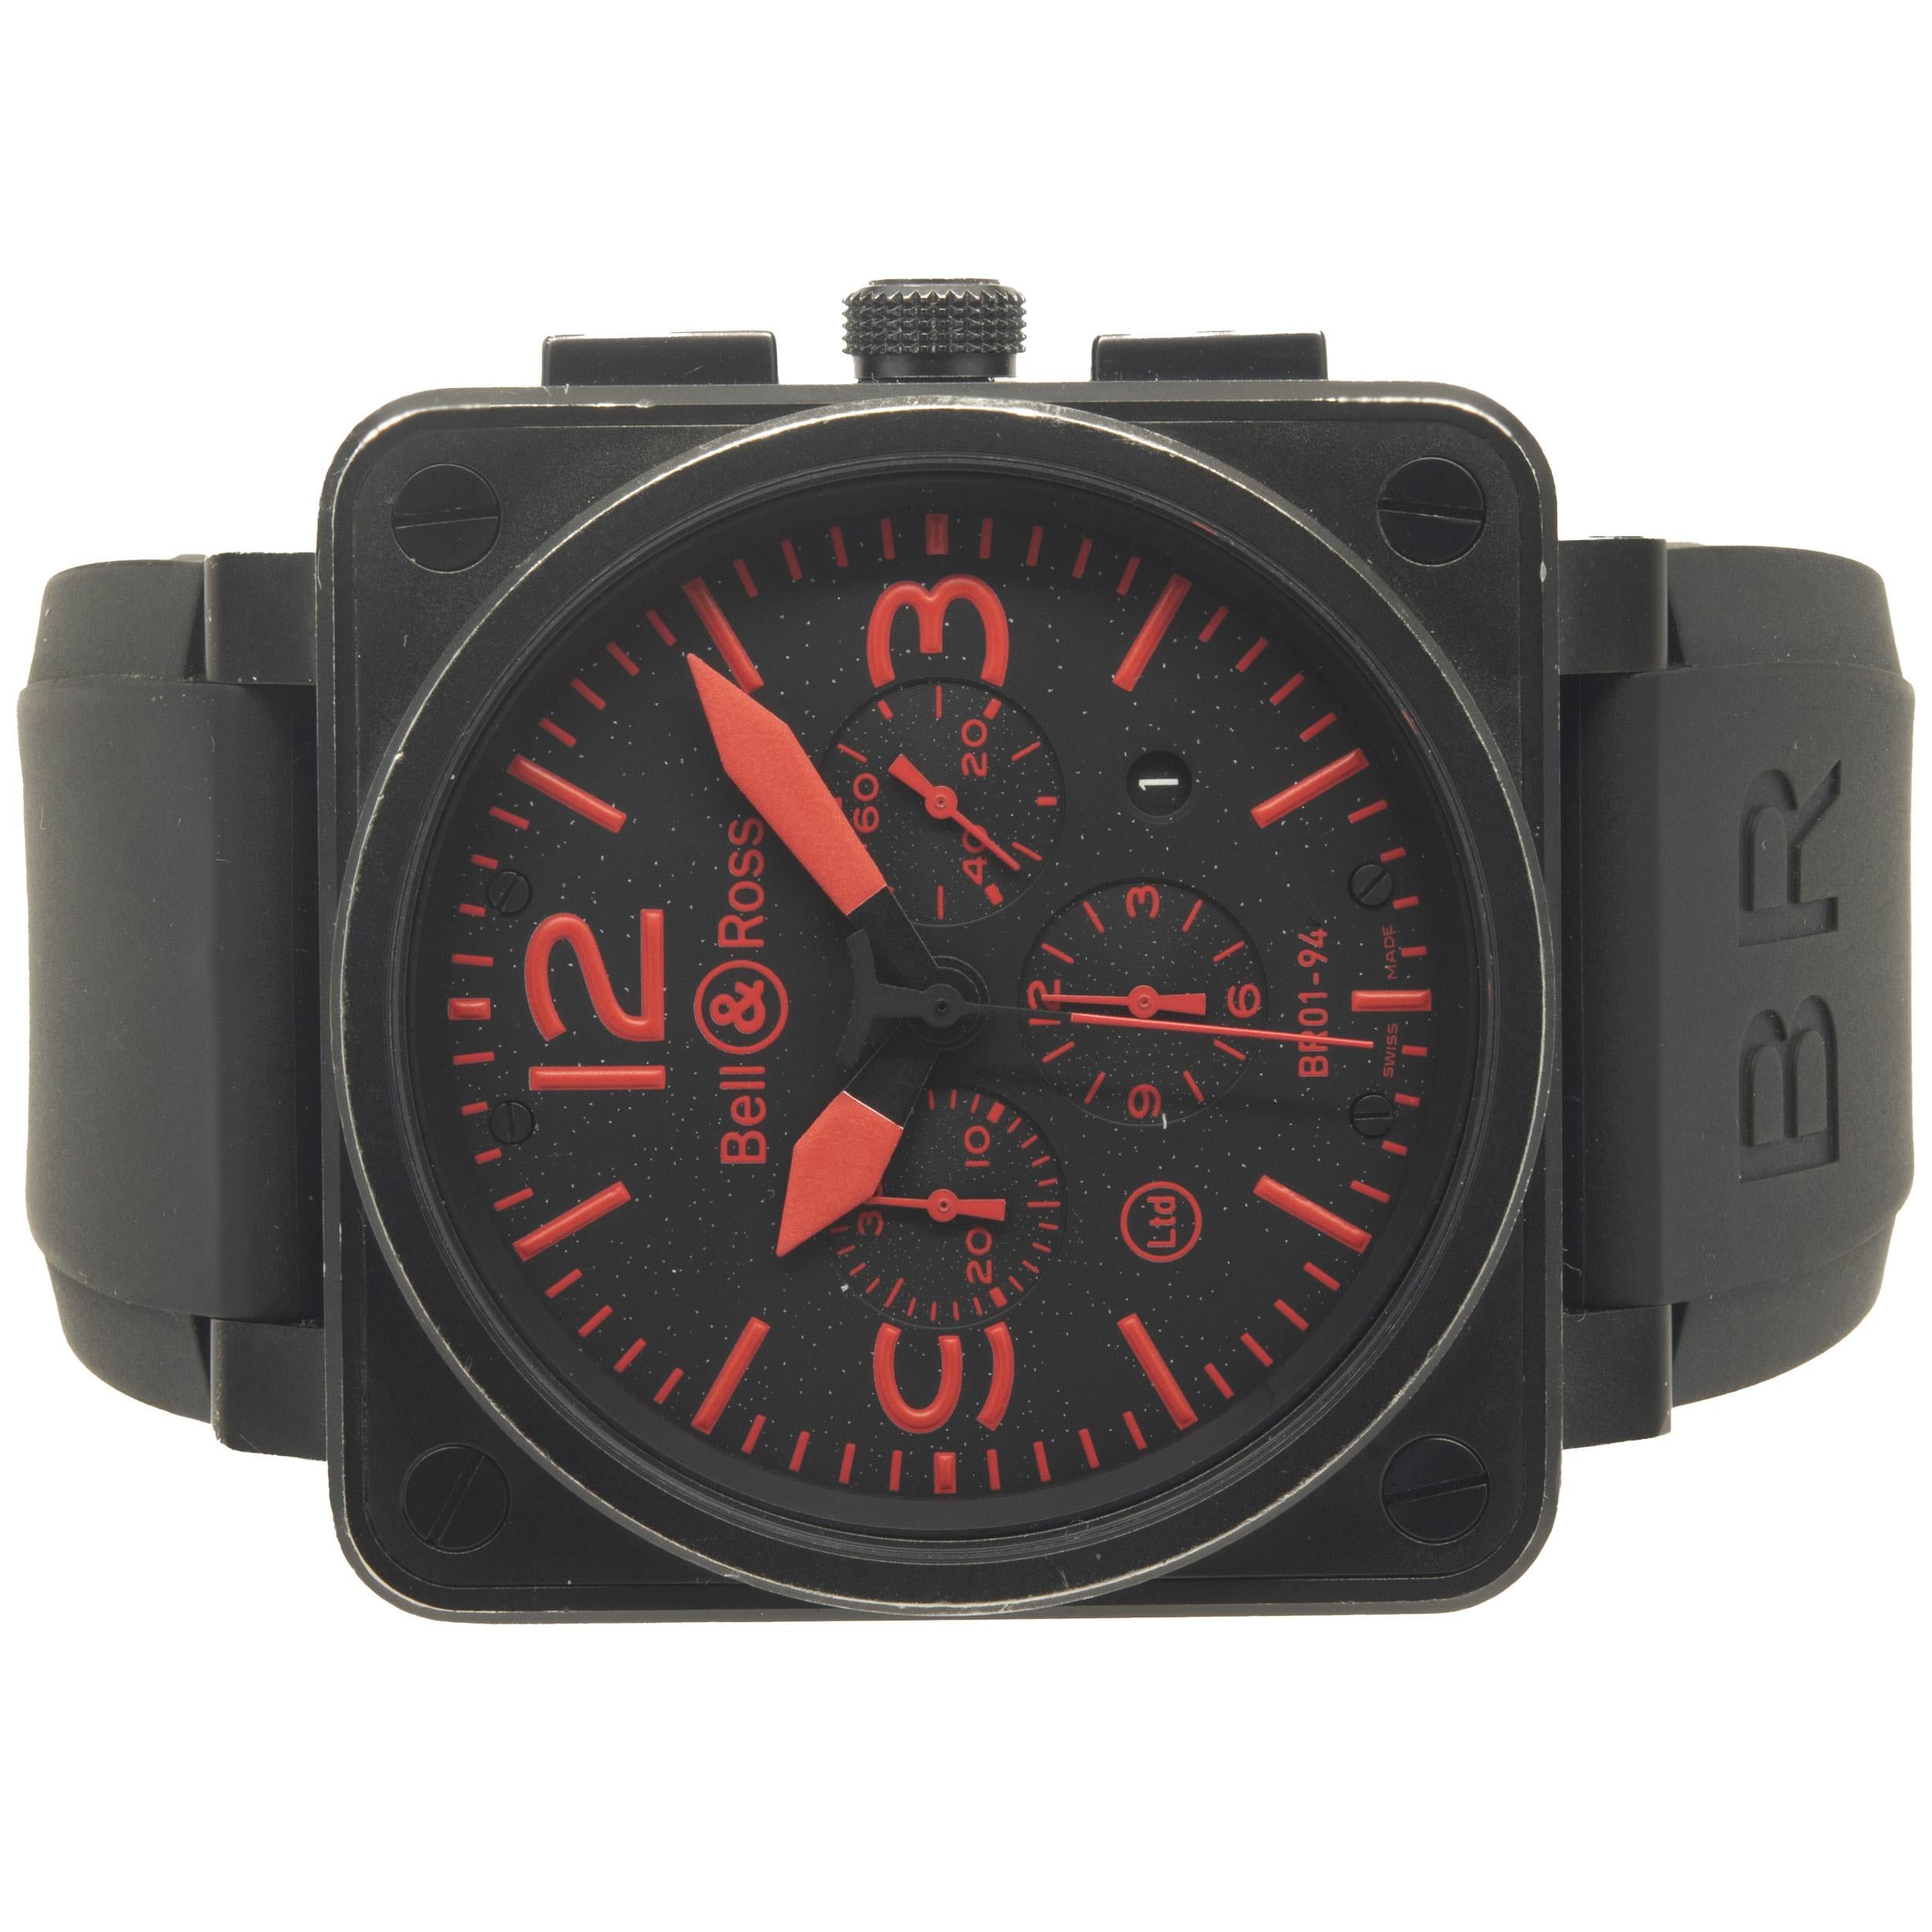 Movement: automatic
Function: hours, minutes, seconds, date, chronograph
Case: 45mm square case with scratch resistant sapphire crystal, push-pull crown
Band: black rubber BR strap, buckle
Dial: black dial, red stick/arabic numerals, red